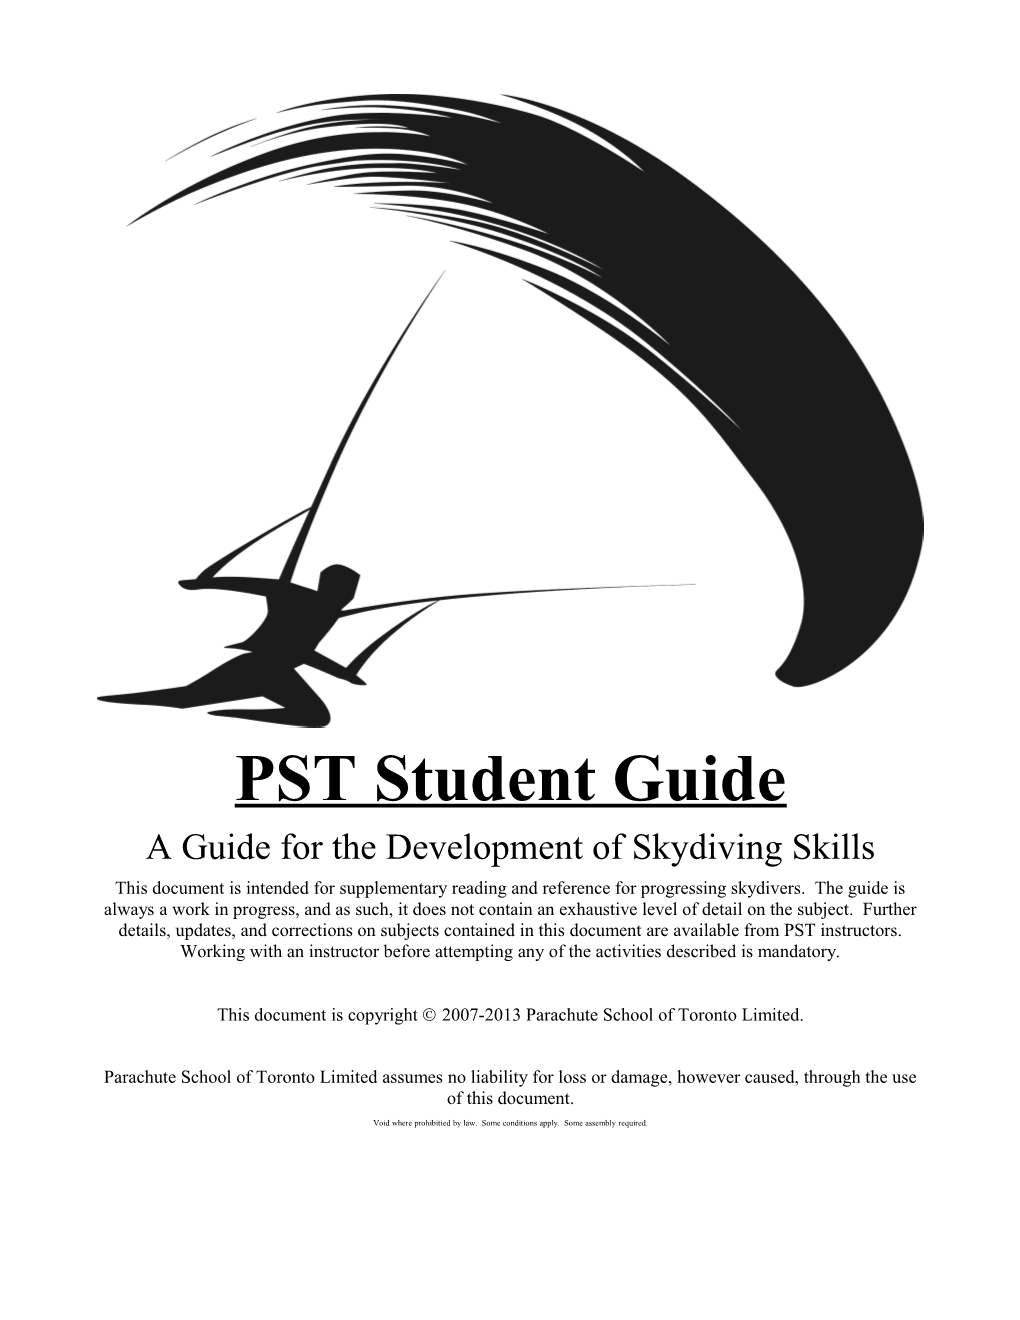 PST Student Guide